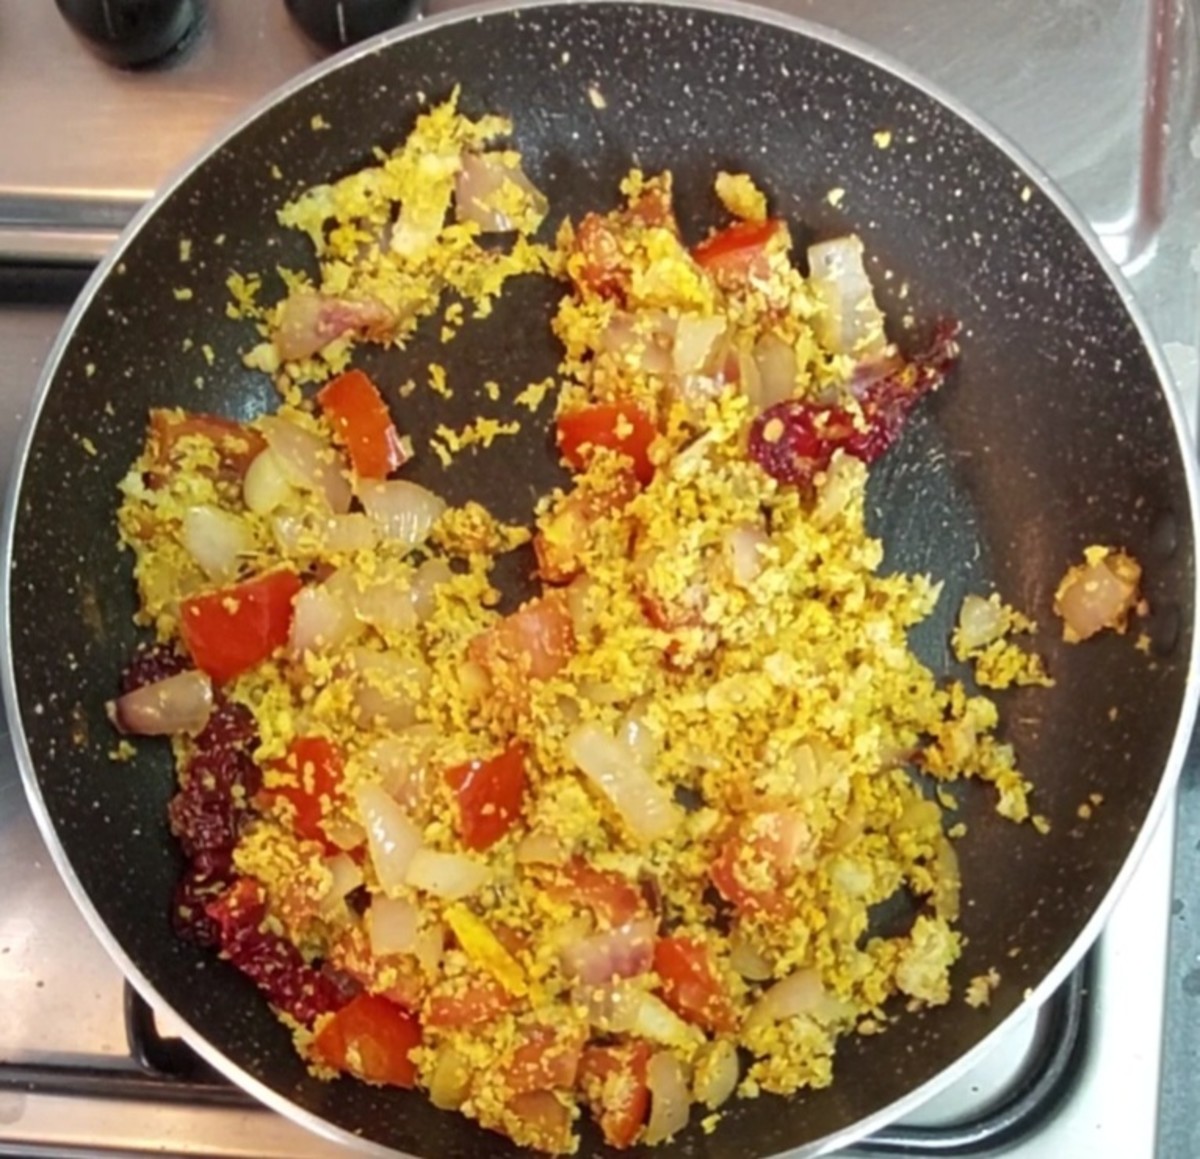 Add 1 cup grated fresh coconut and 1/2 teaspoon turmeric powder. Give a quick mix and switch off the flame.